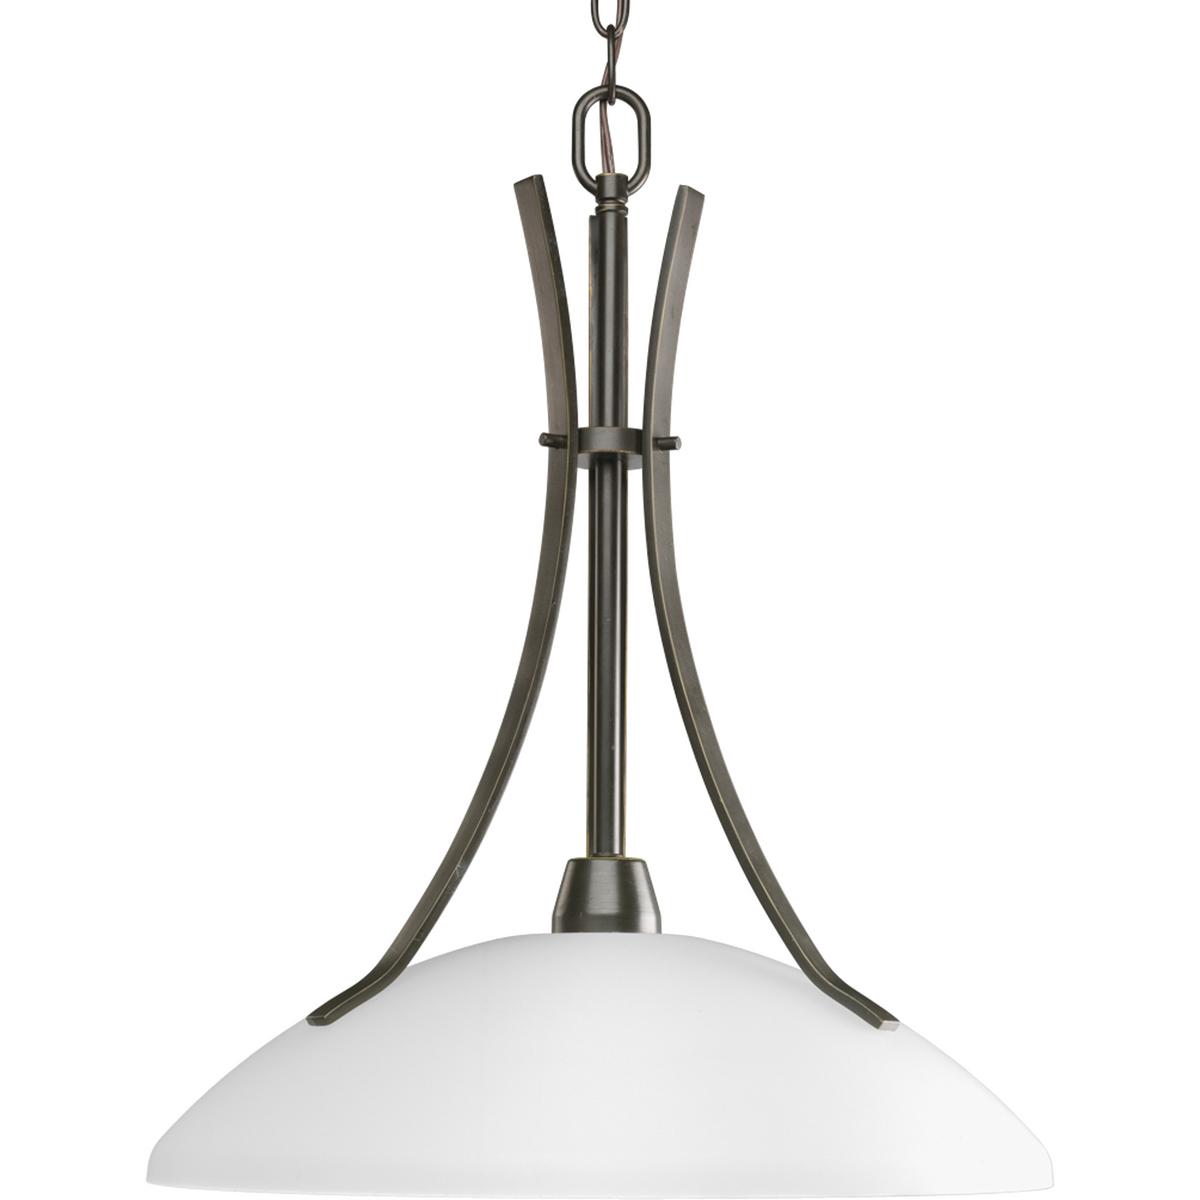 Hubbell P5112-20 The Wisten Collection features sweeping arcs framing elegant, tapered glass shades. Cool and modern with a casual flair, Wisten provides a signature look to any room.  One-light pendant with etched glass in an Antique Bronze finish.  ; Sweeping arms frami